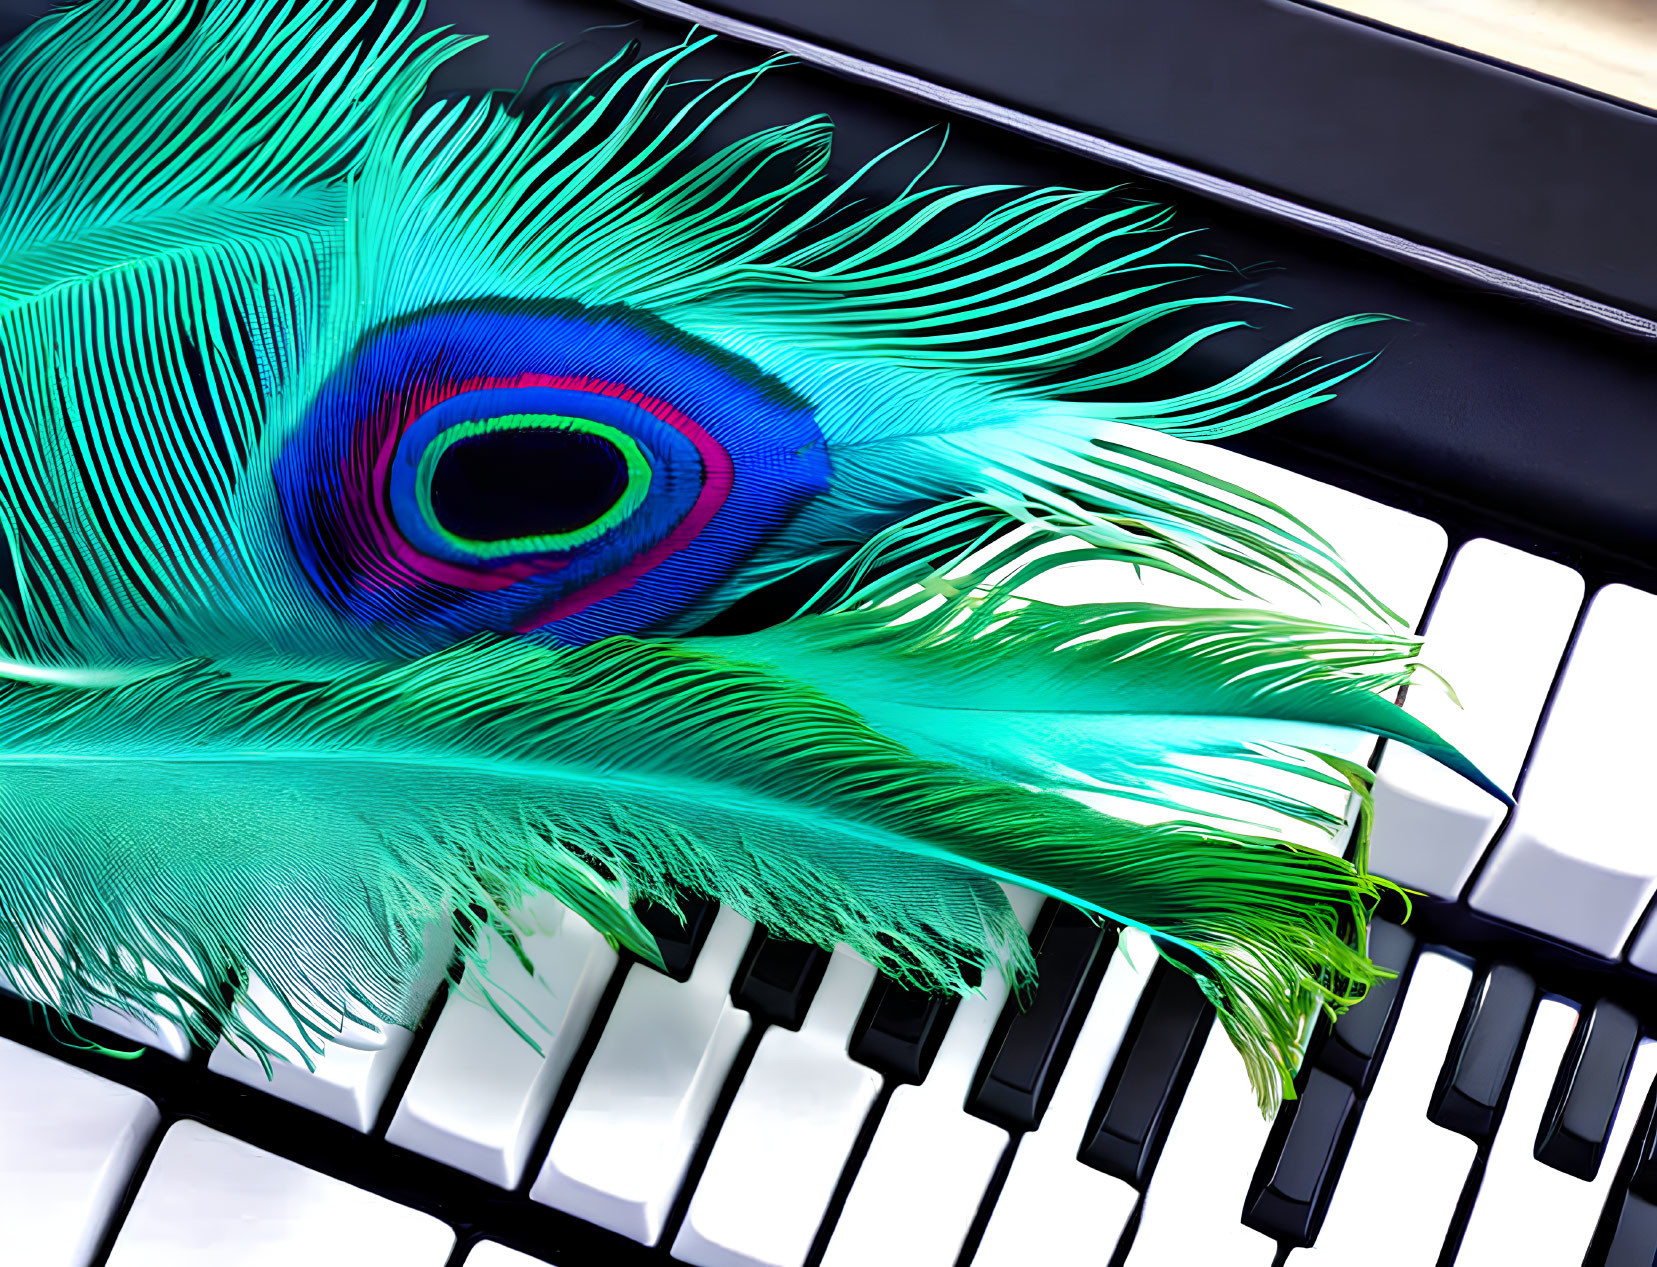 Colorful peacock feather with blue eye pattern on piano keys